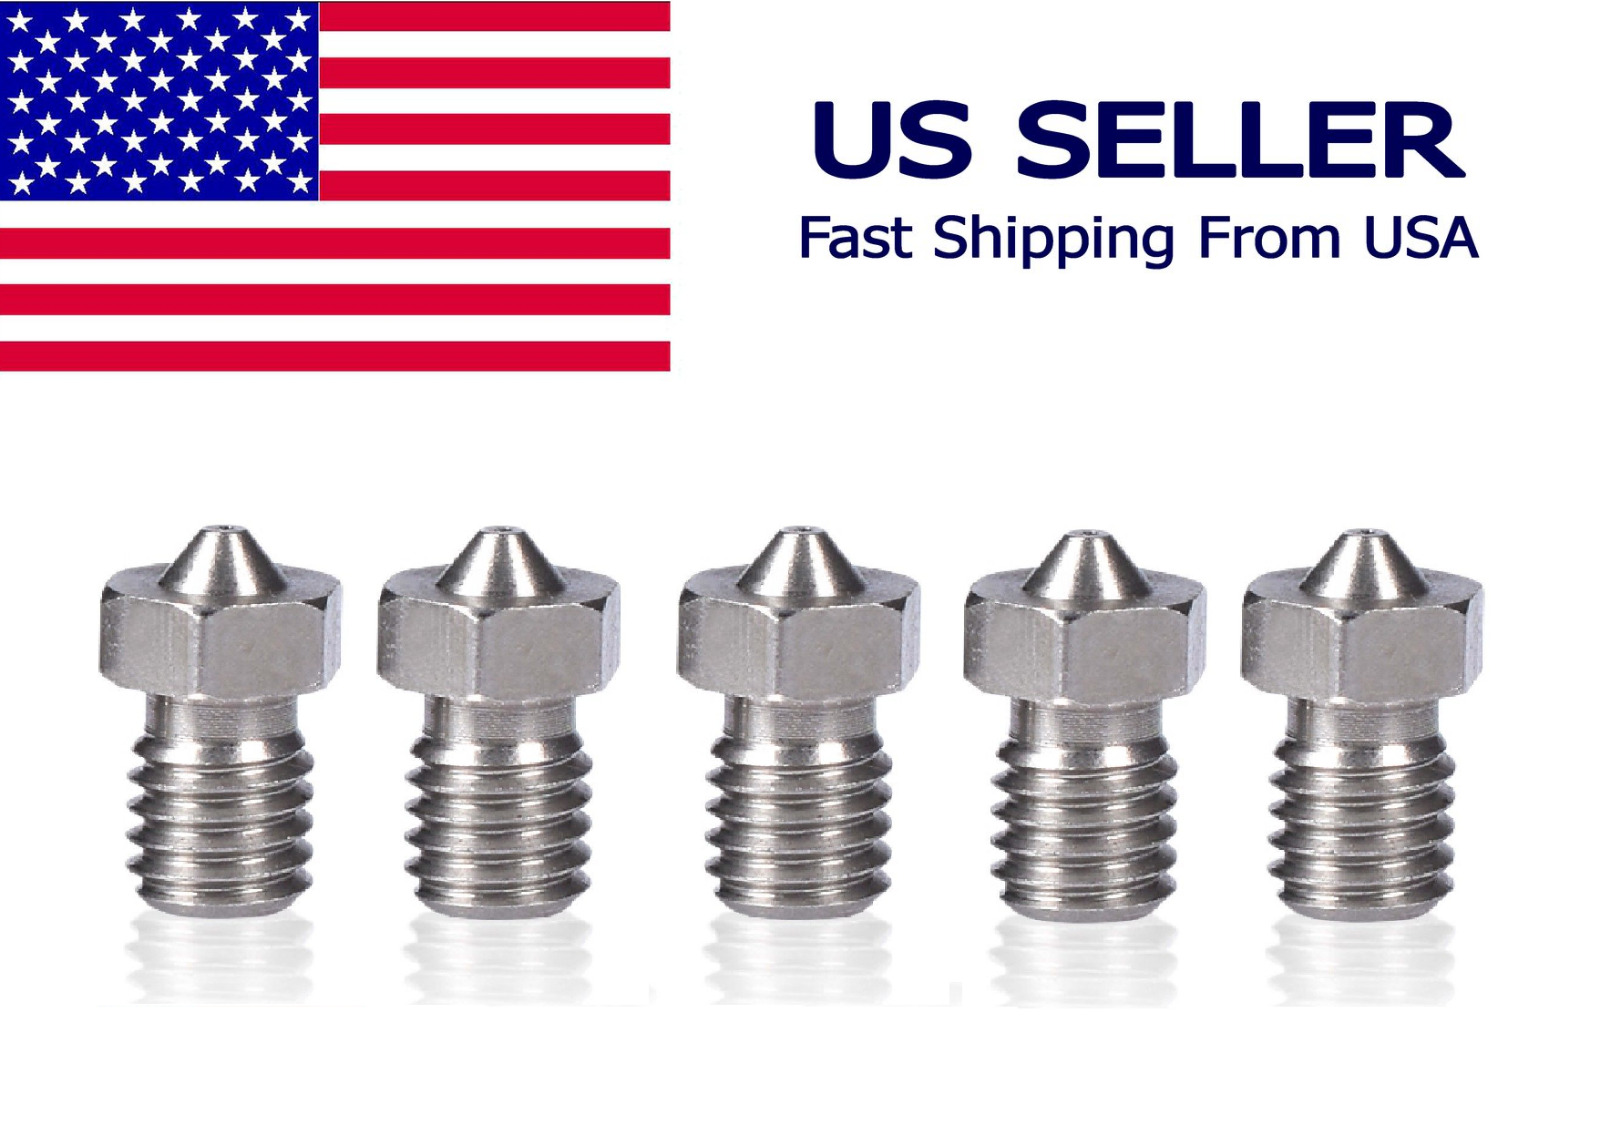 M6 Assorted Stainless Steel Nozzle Extruder Hotend 1.75mm Filament V5-V6